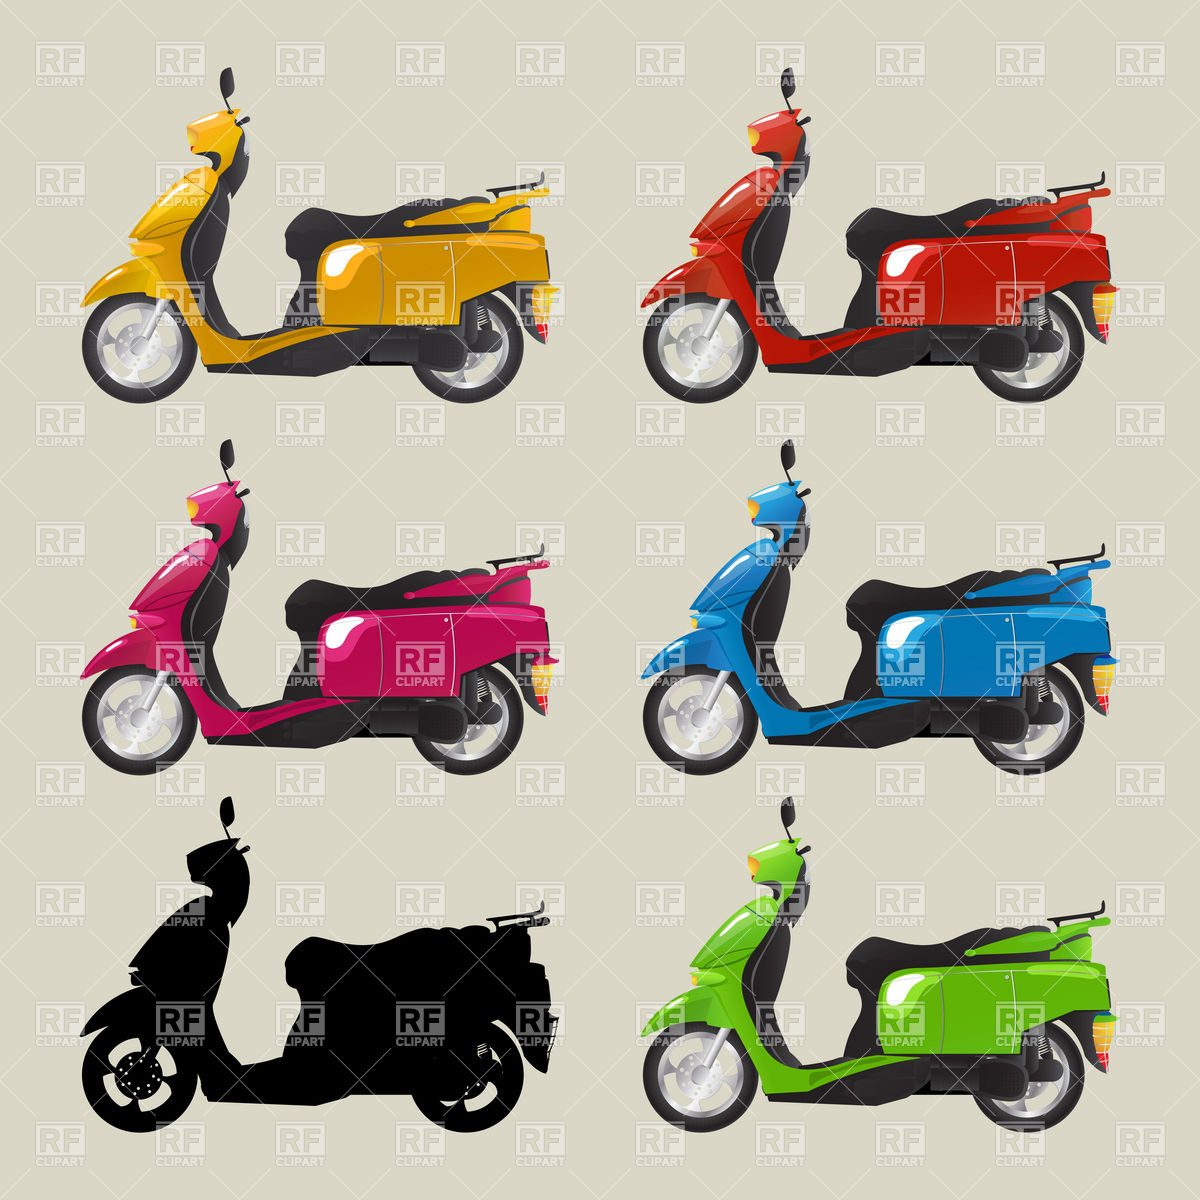 Retro Motor Scooter In Colors And Silhouette Download Royalty Free    